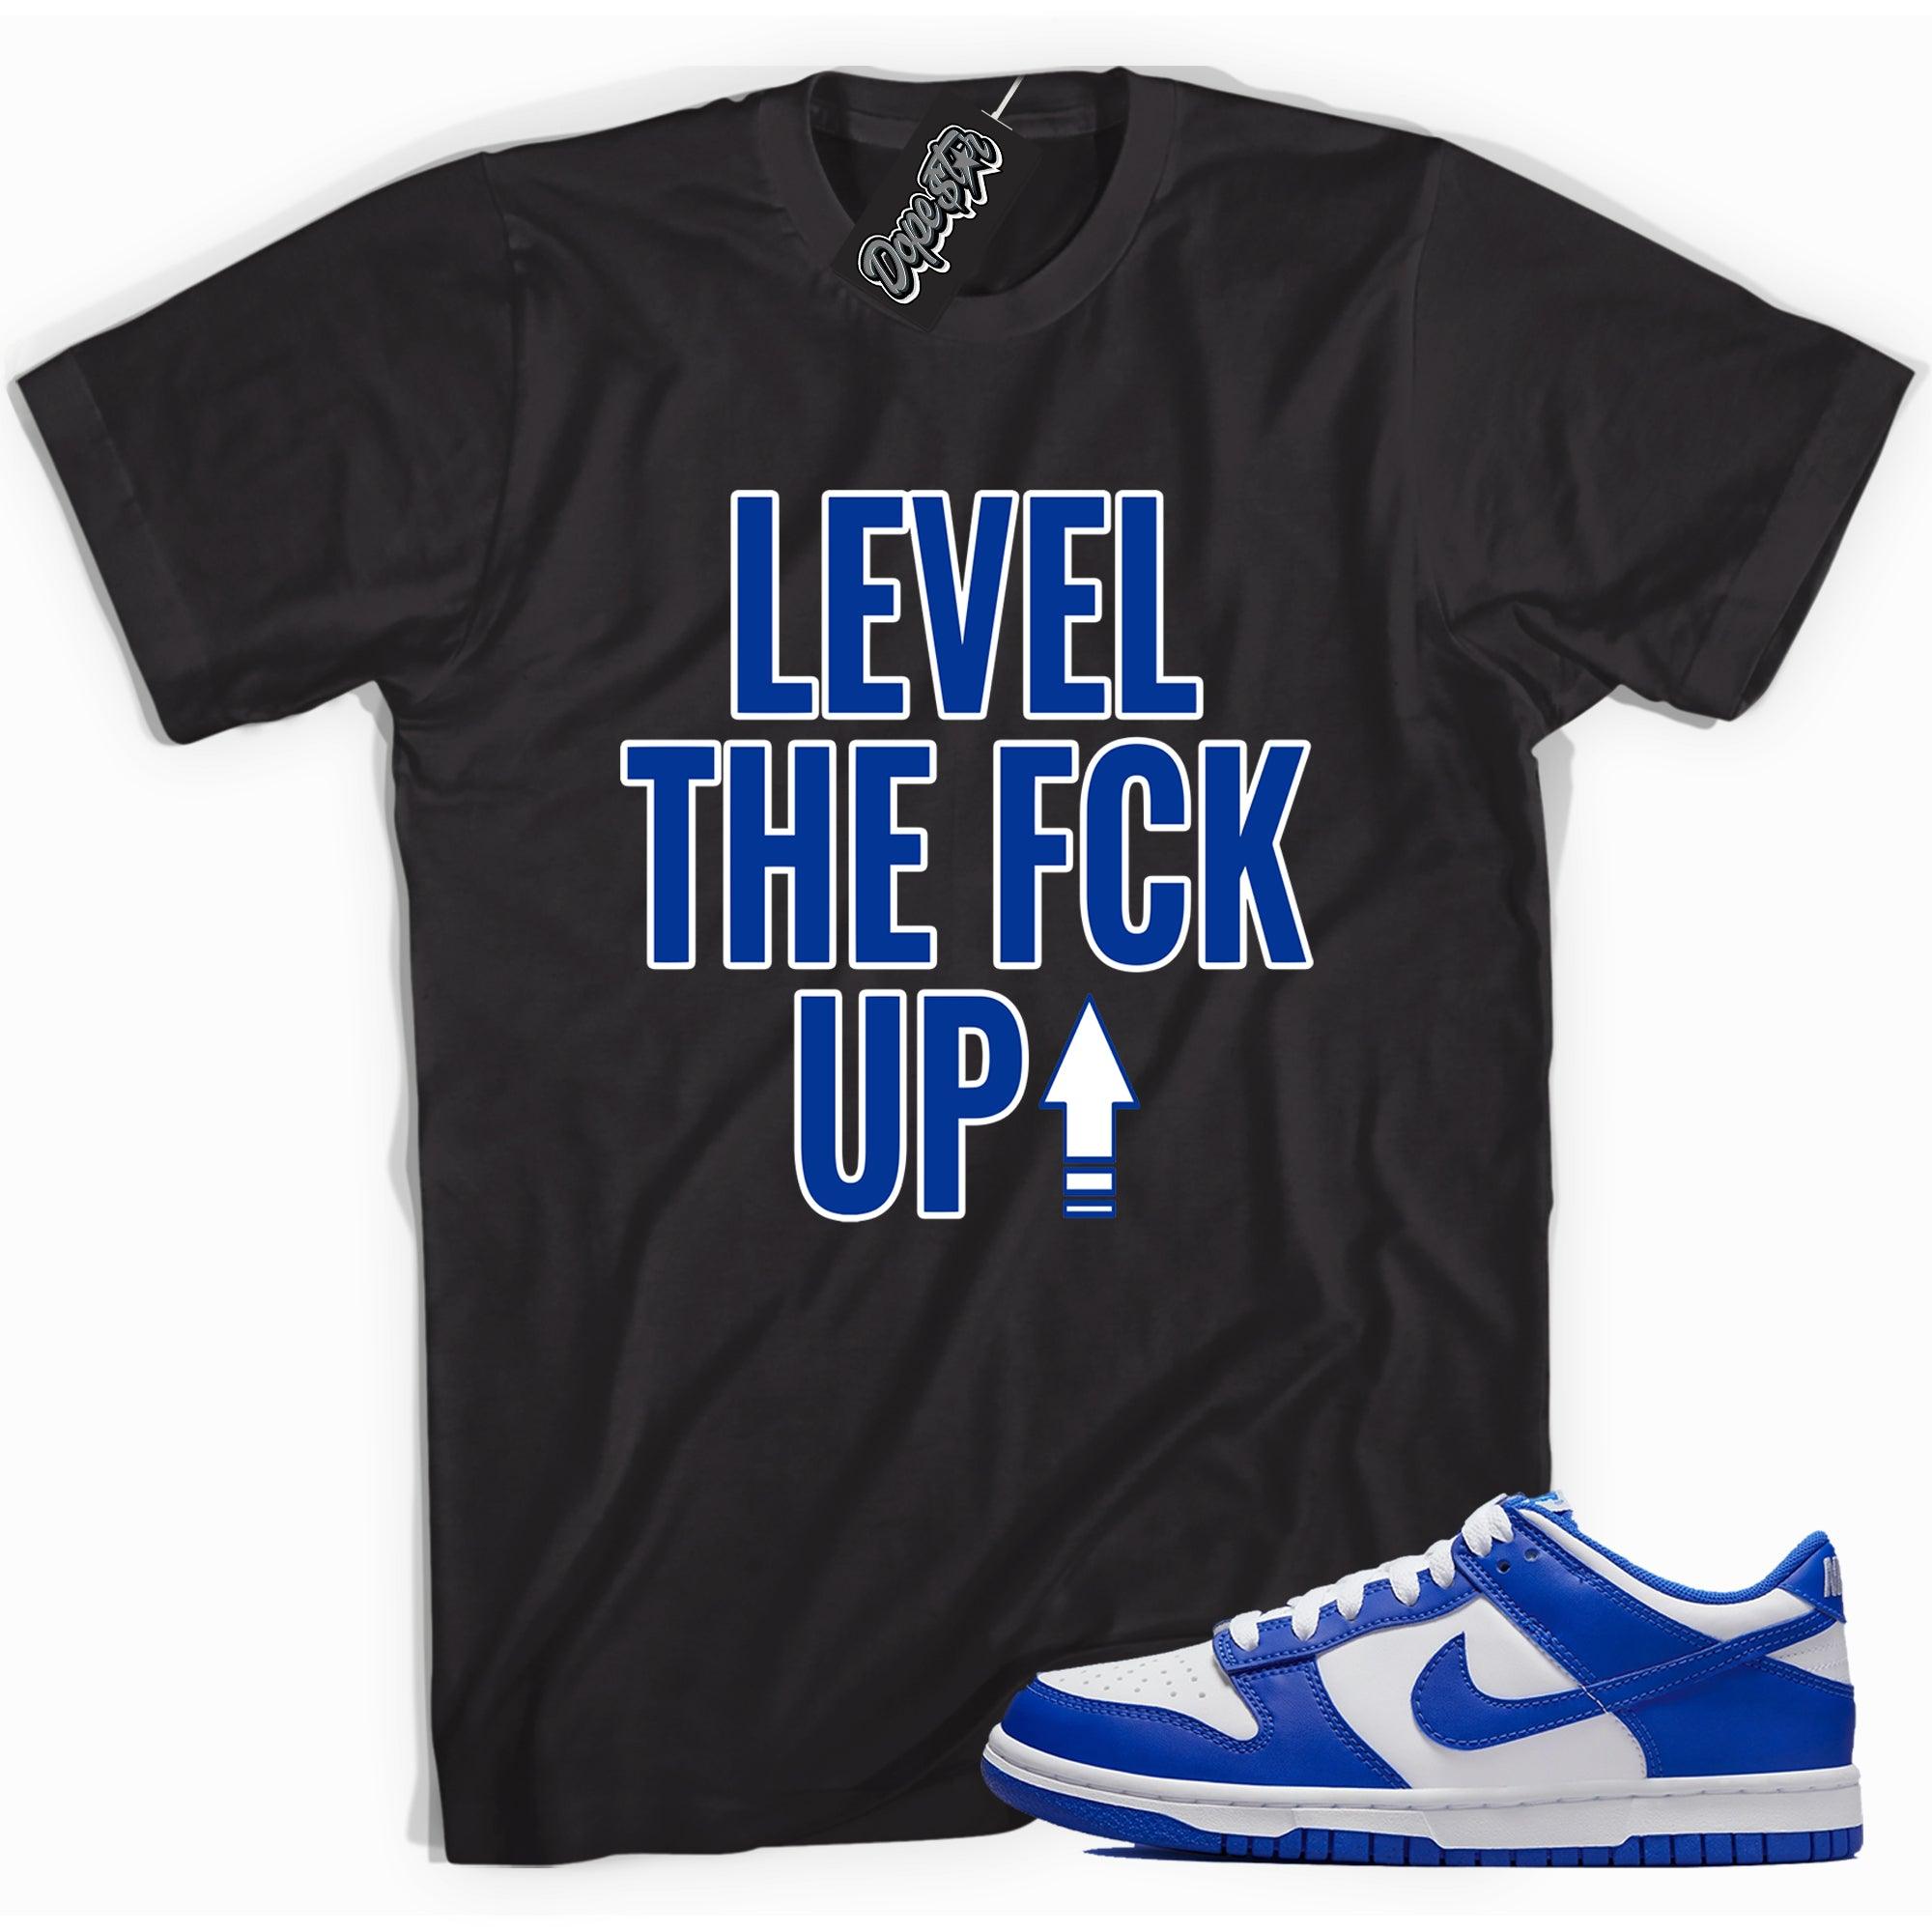 Cool black graphic tee with 'Level Up' print, that perfectly matches Nike Dunk Low Racer Blue sneakers.